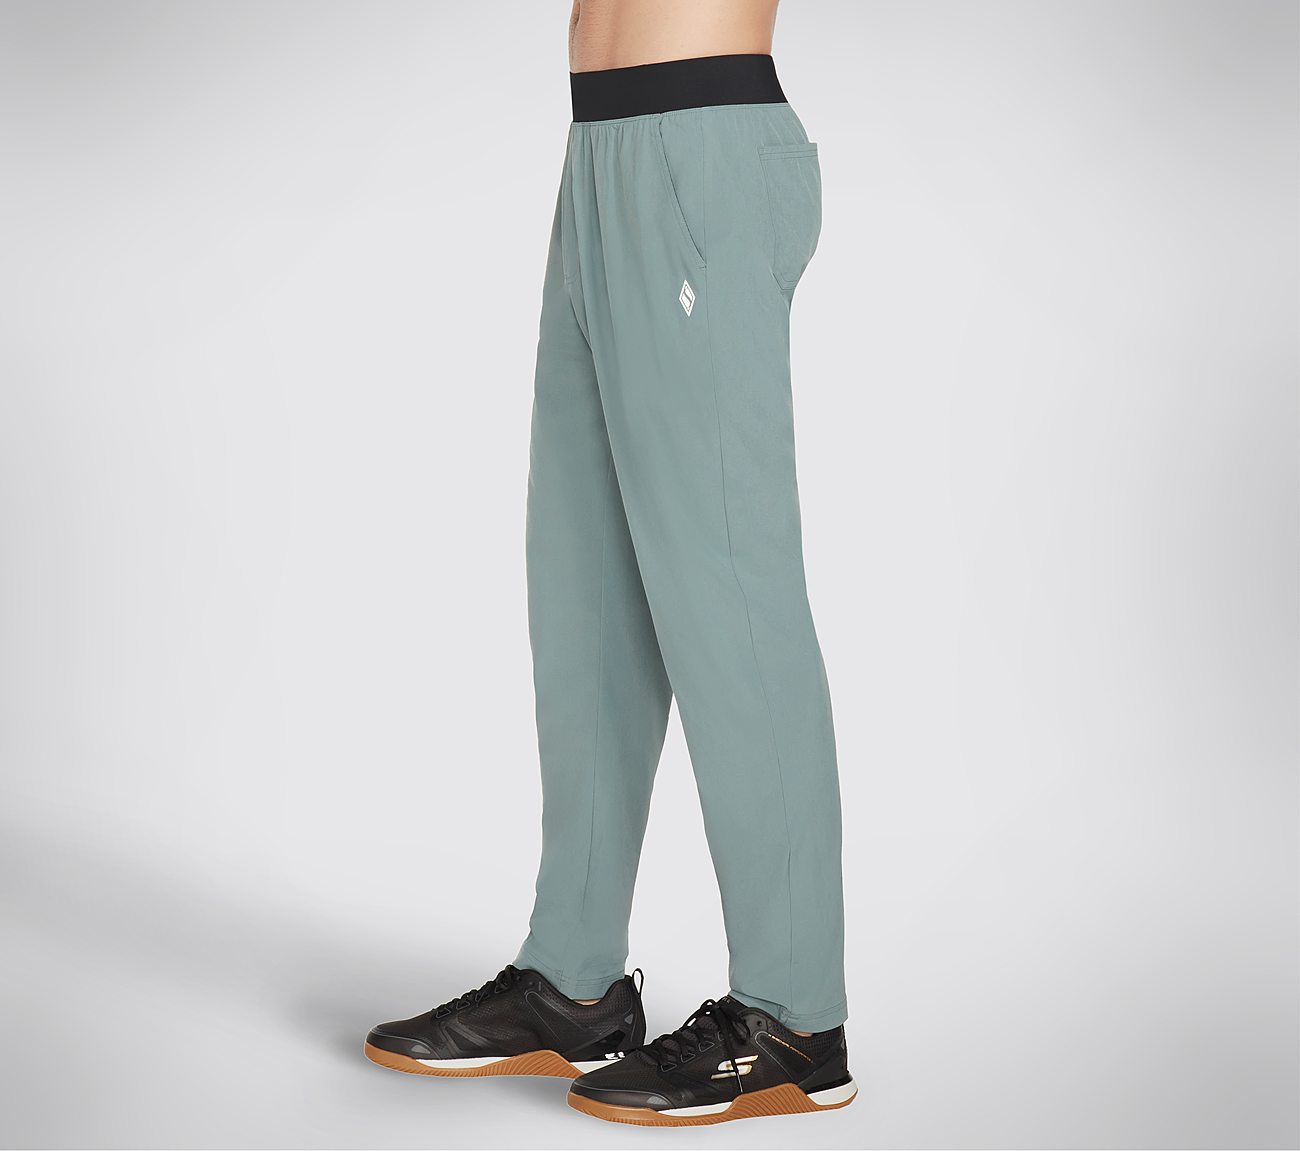 GO WALK ACTION PANT, TEAL/BLUE Apparel Bottom View